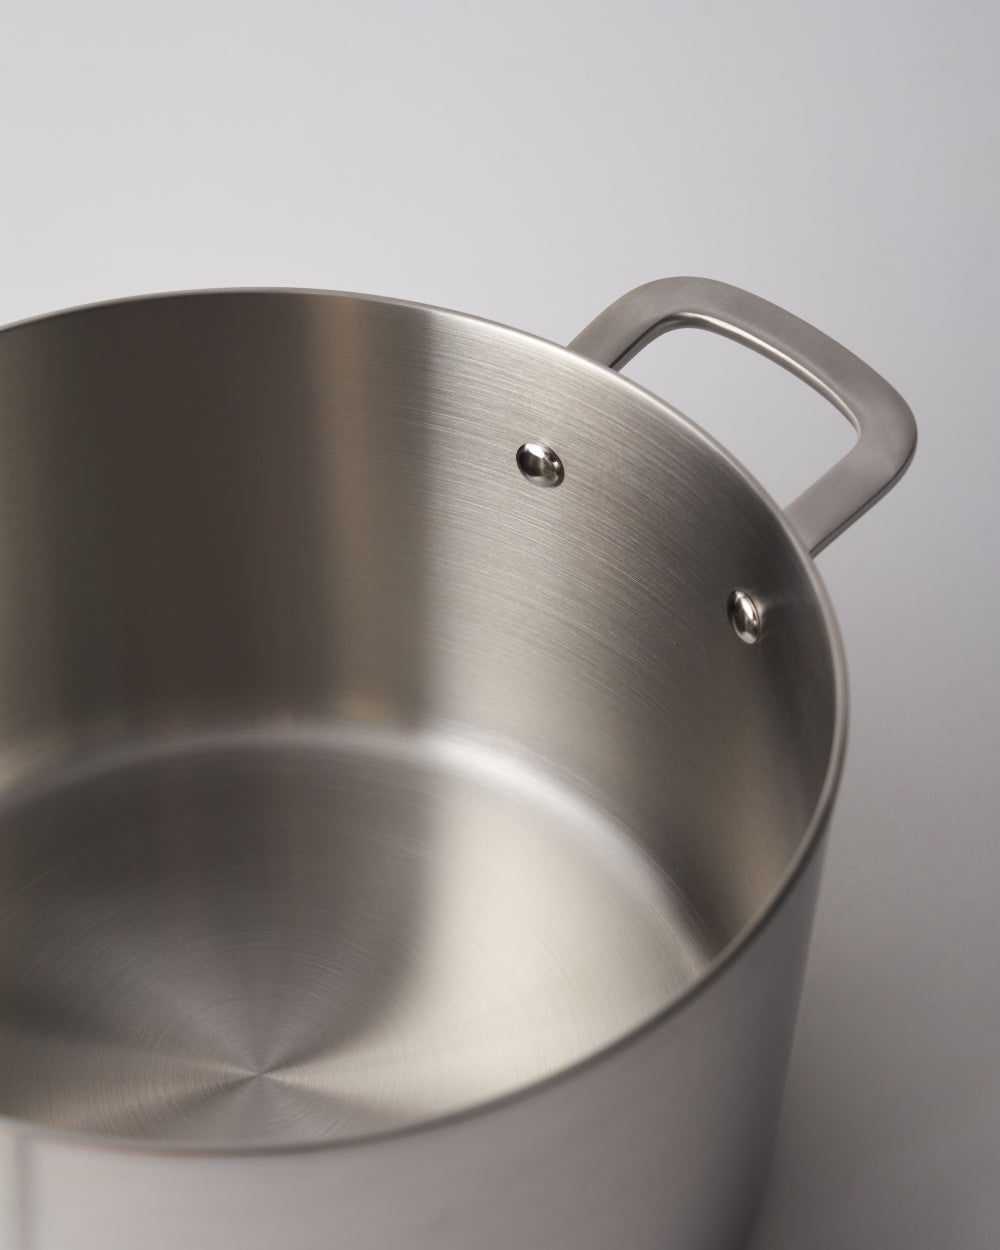 Stainless Steel Big Stock Pot -Size From 30 to 55cm - China Cookware Set  and Stainless Steel Cookware price